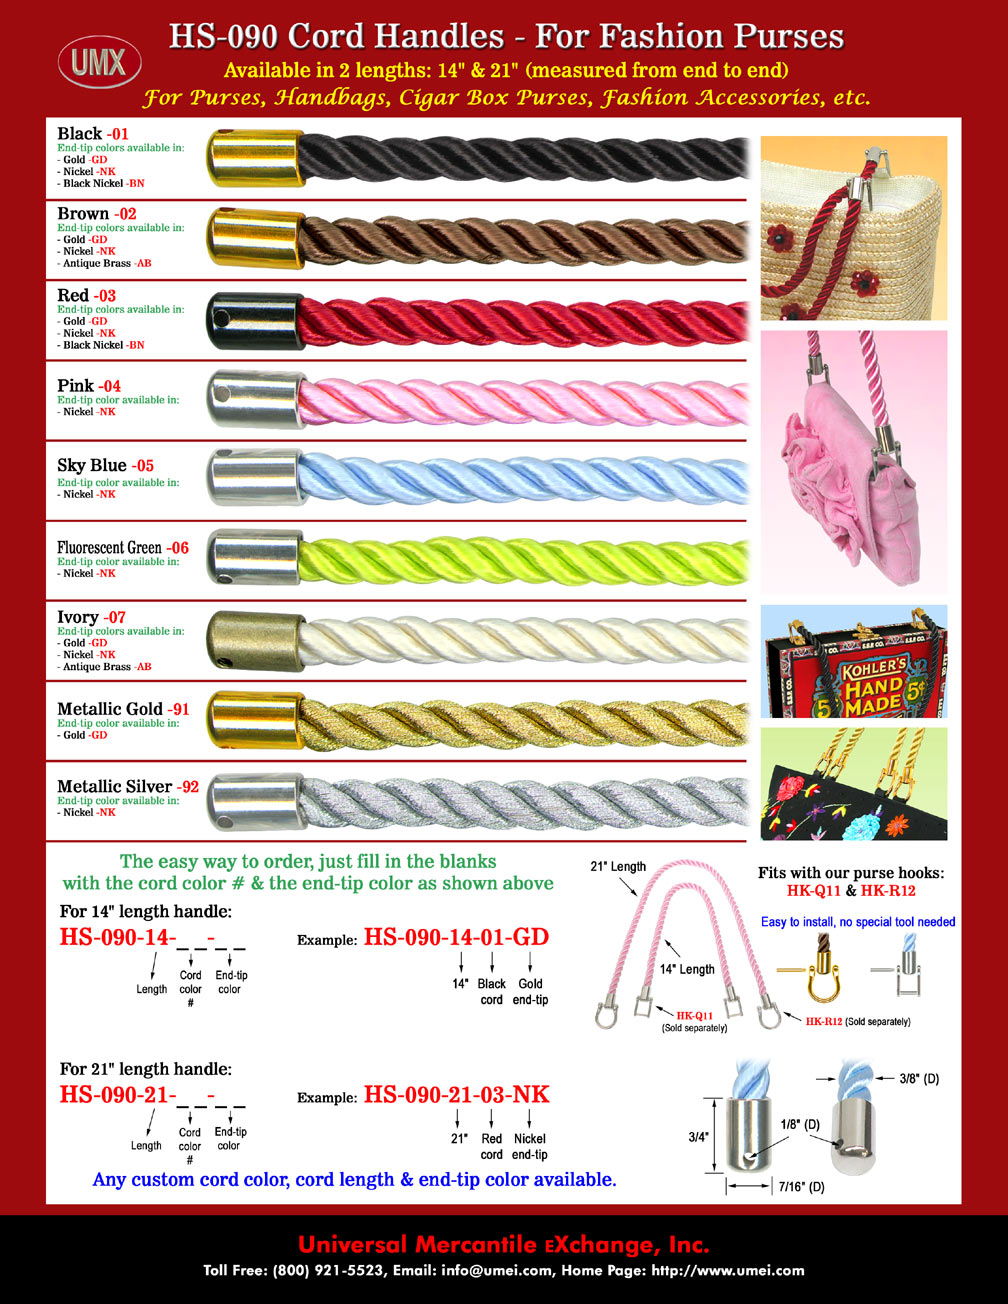 Fashion Cord Handles: For Purses, Handbags, Tote Bags, Cigar Boxes or Jewelry Boxes.